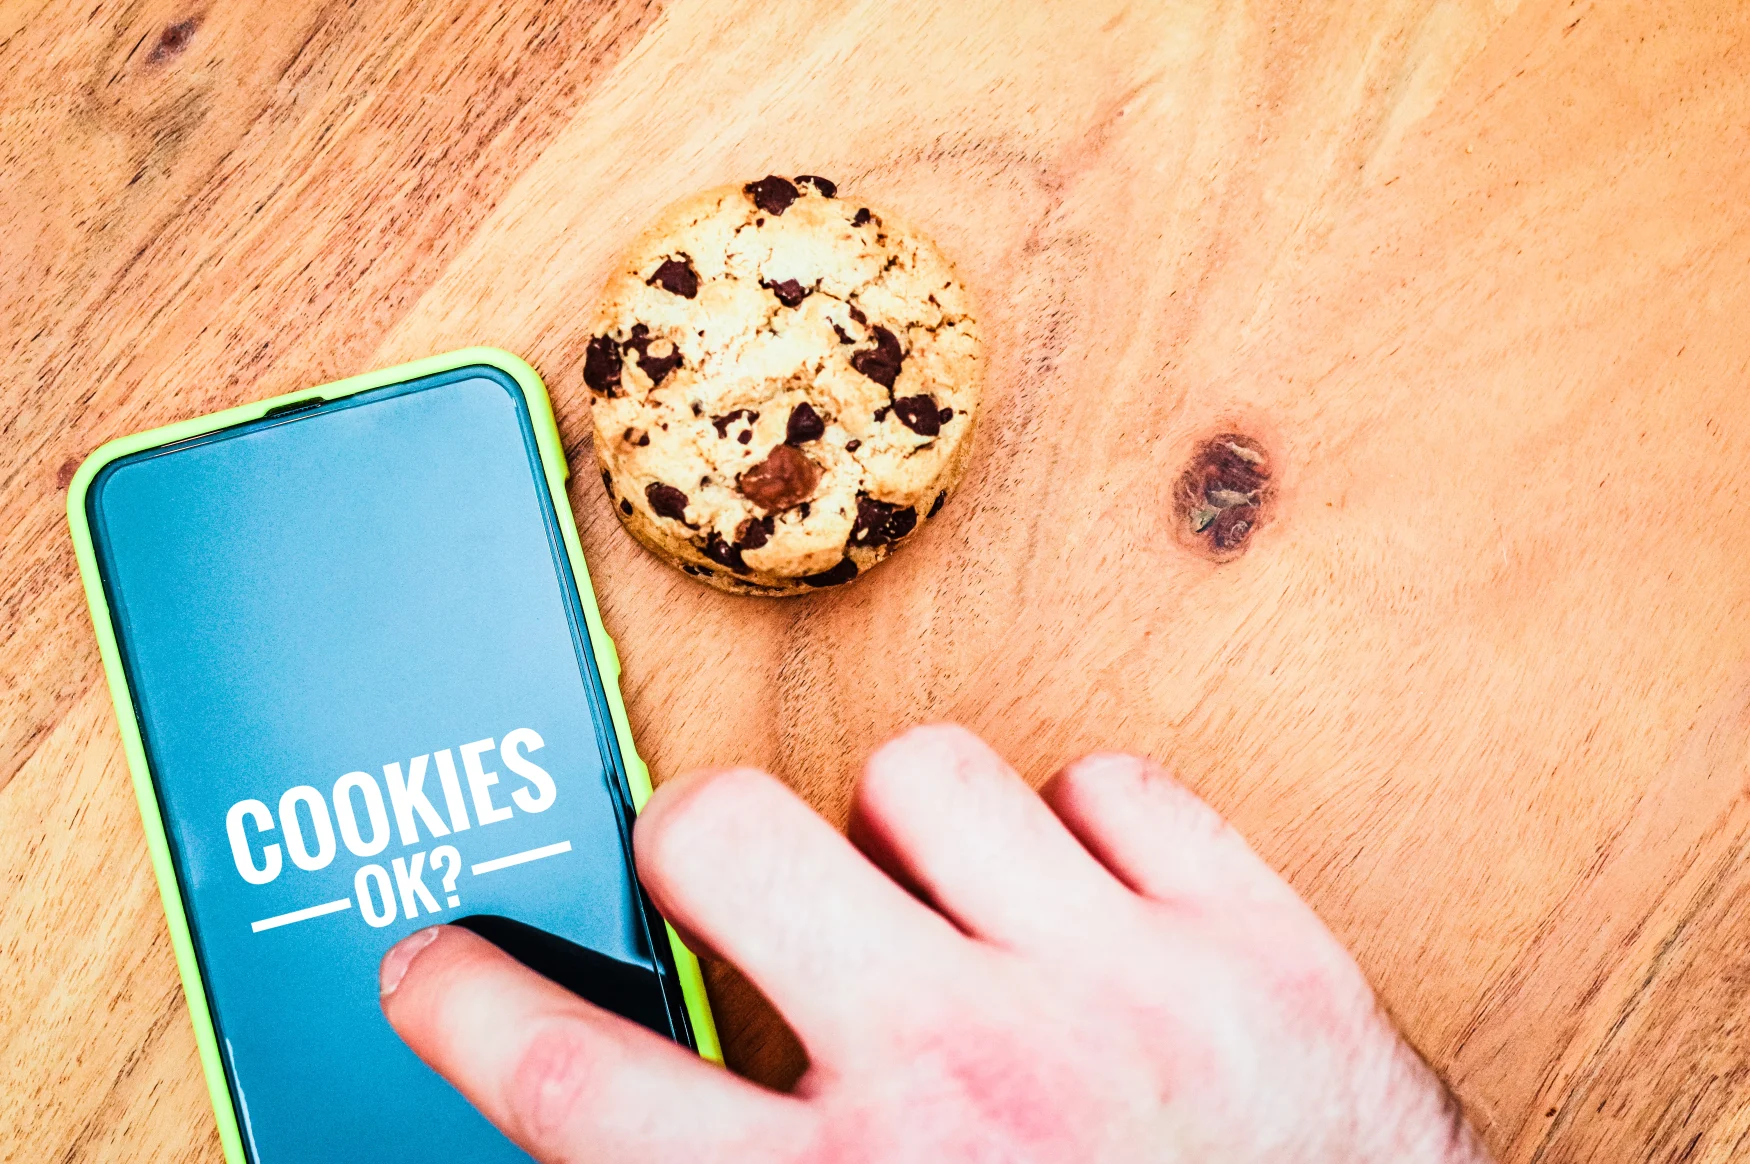 Accept cookies with a tablet to illustrate cookie banners for websites with cookies and cookies ok?